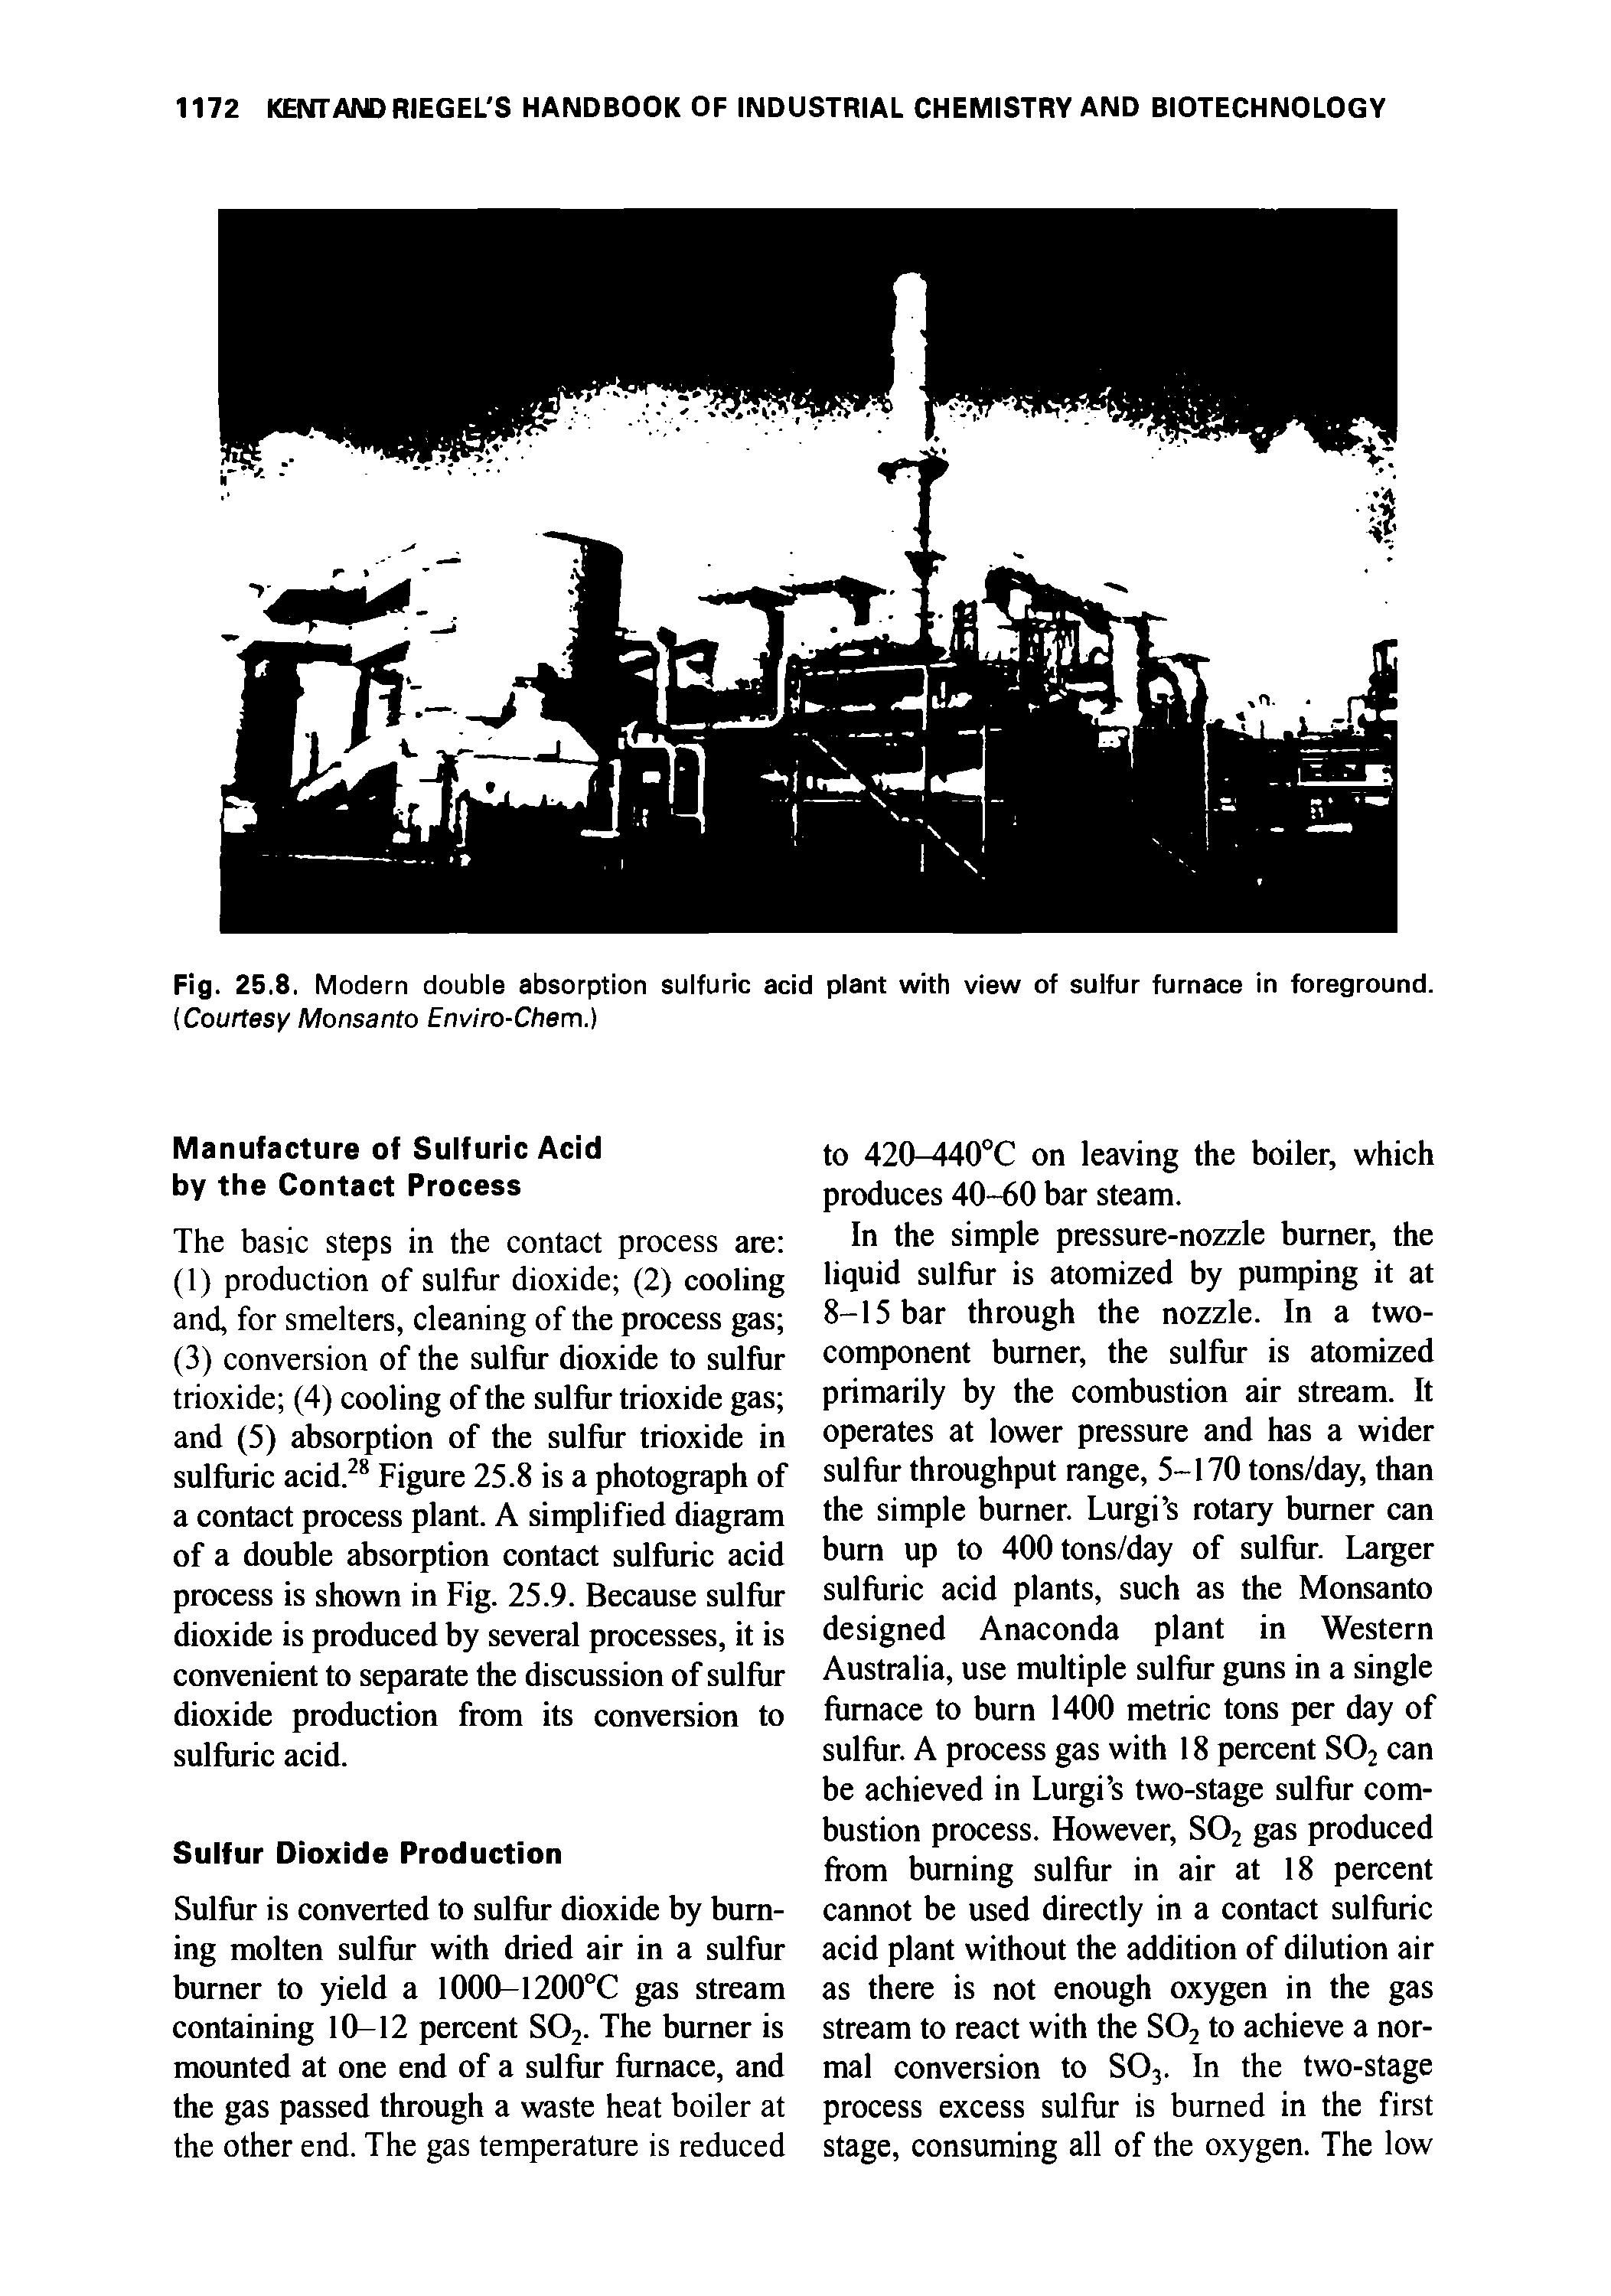 Fig. 25.8. Modern double absorption sulfuric acid plant with view of sulfur furnace in foreground. (Courtesy Monsanto Enviro-Chem.)...